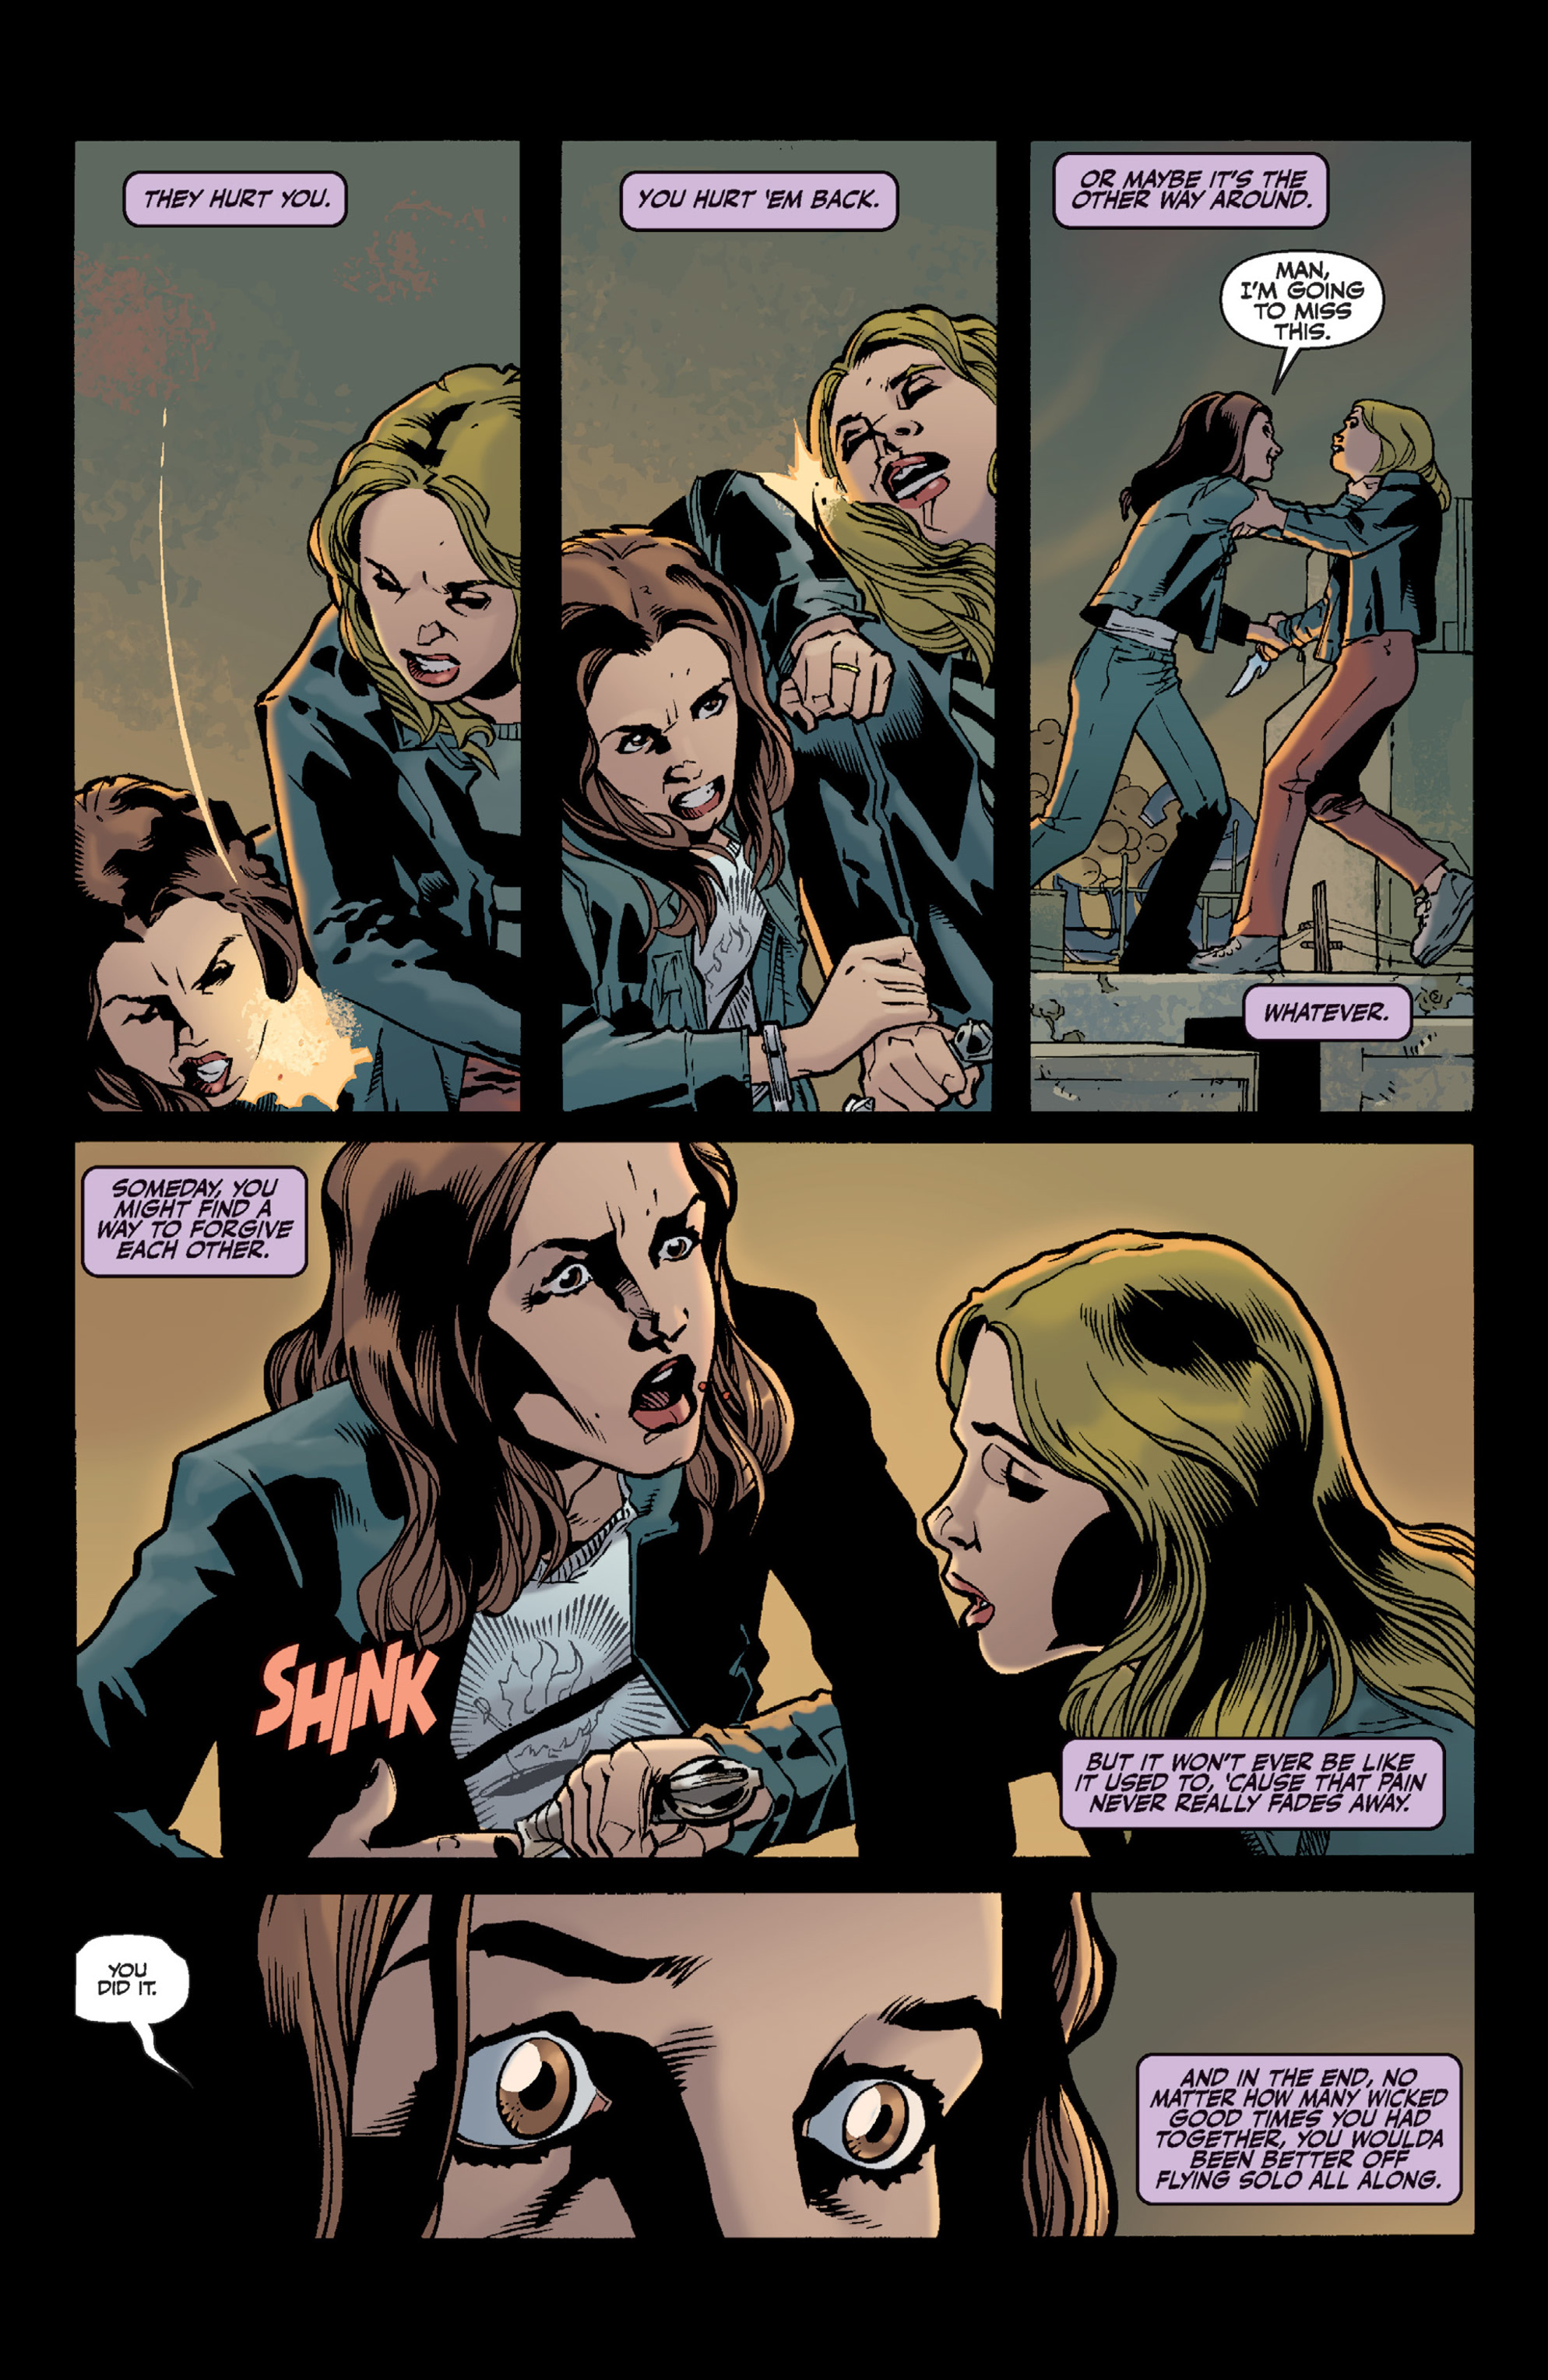 Read online Buffy the Vampire Slayer Season Eight comic -  Issue # _TPB 2 - No Future For You - 34